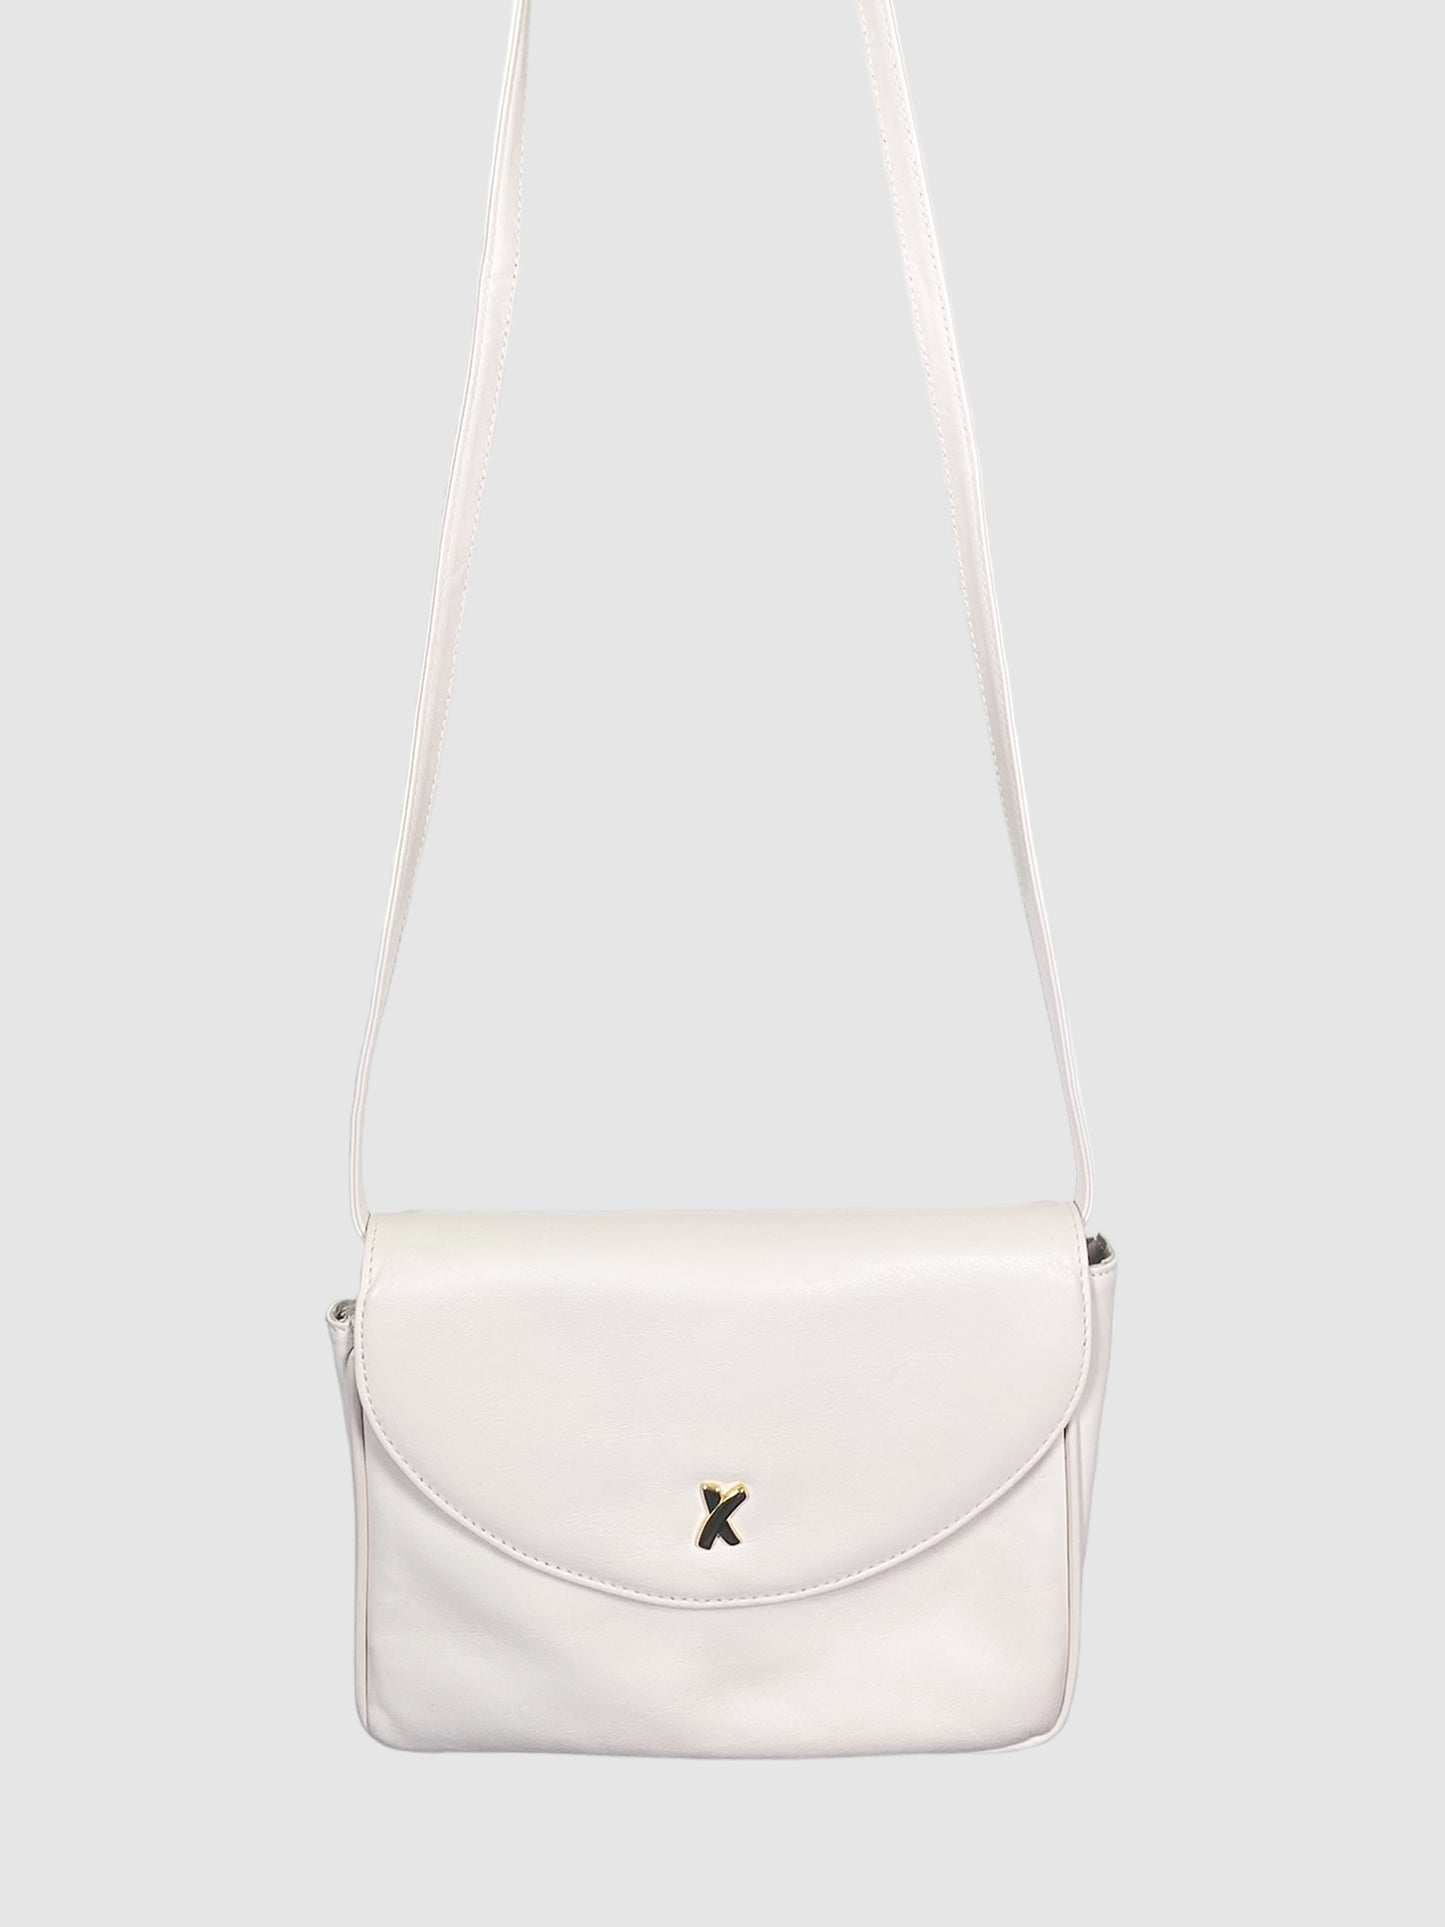 Paloma Picasso Leather Crossbody Bag